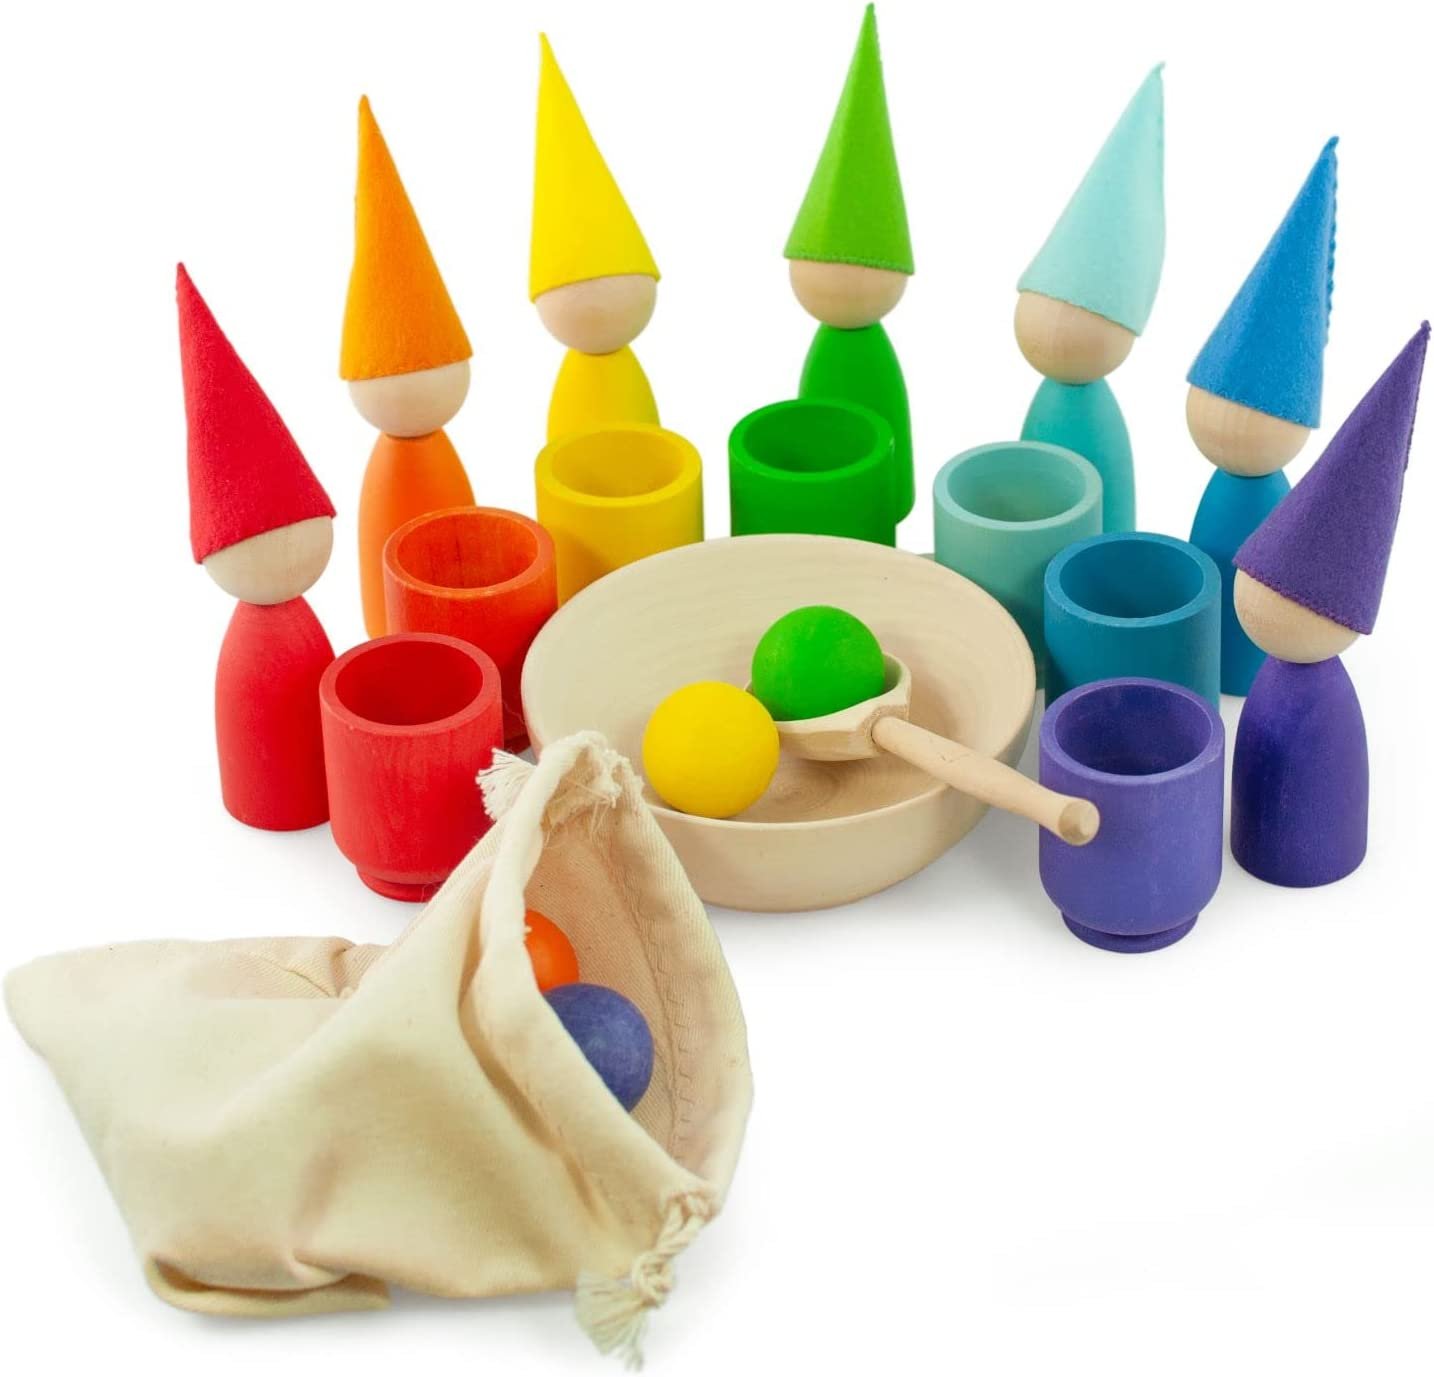 Rainbow Peg Dolls and Balls in Cups 7 Balls 30 mm